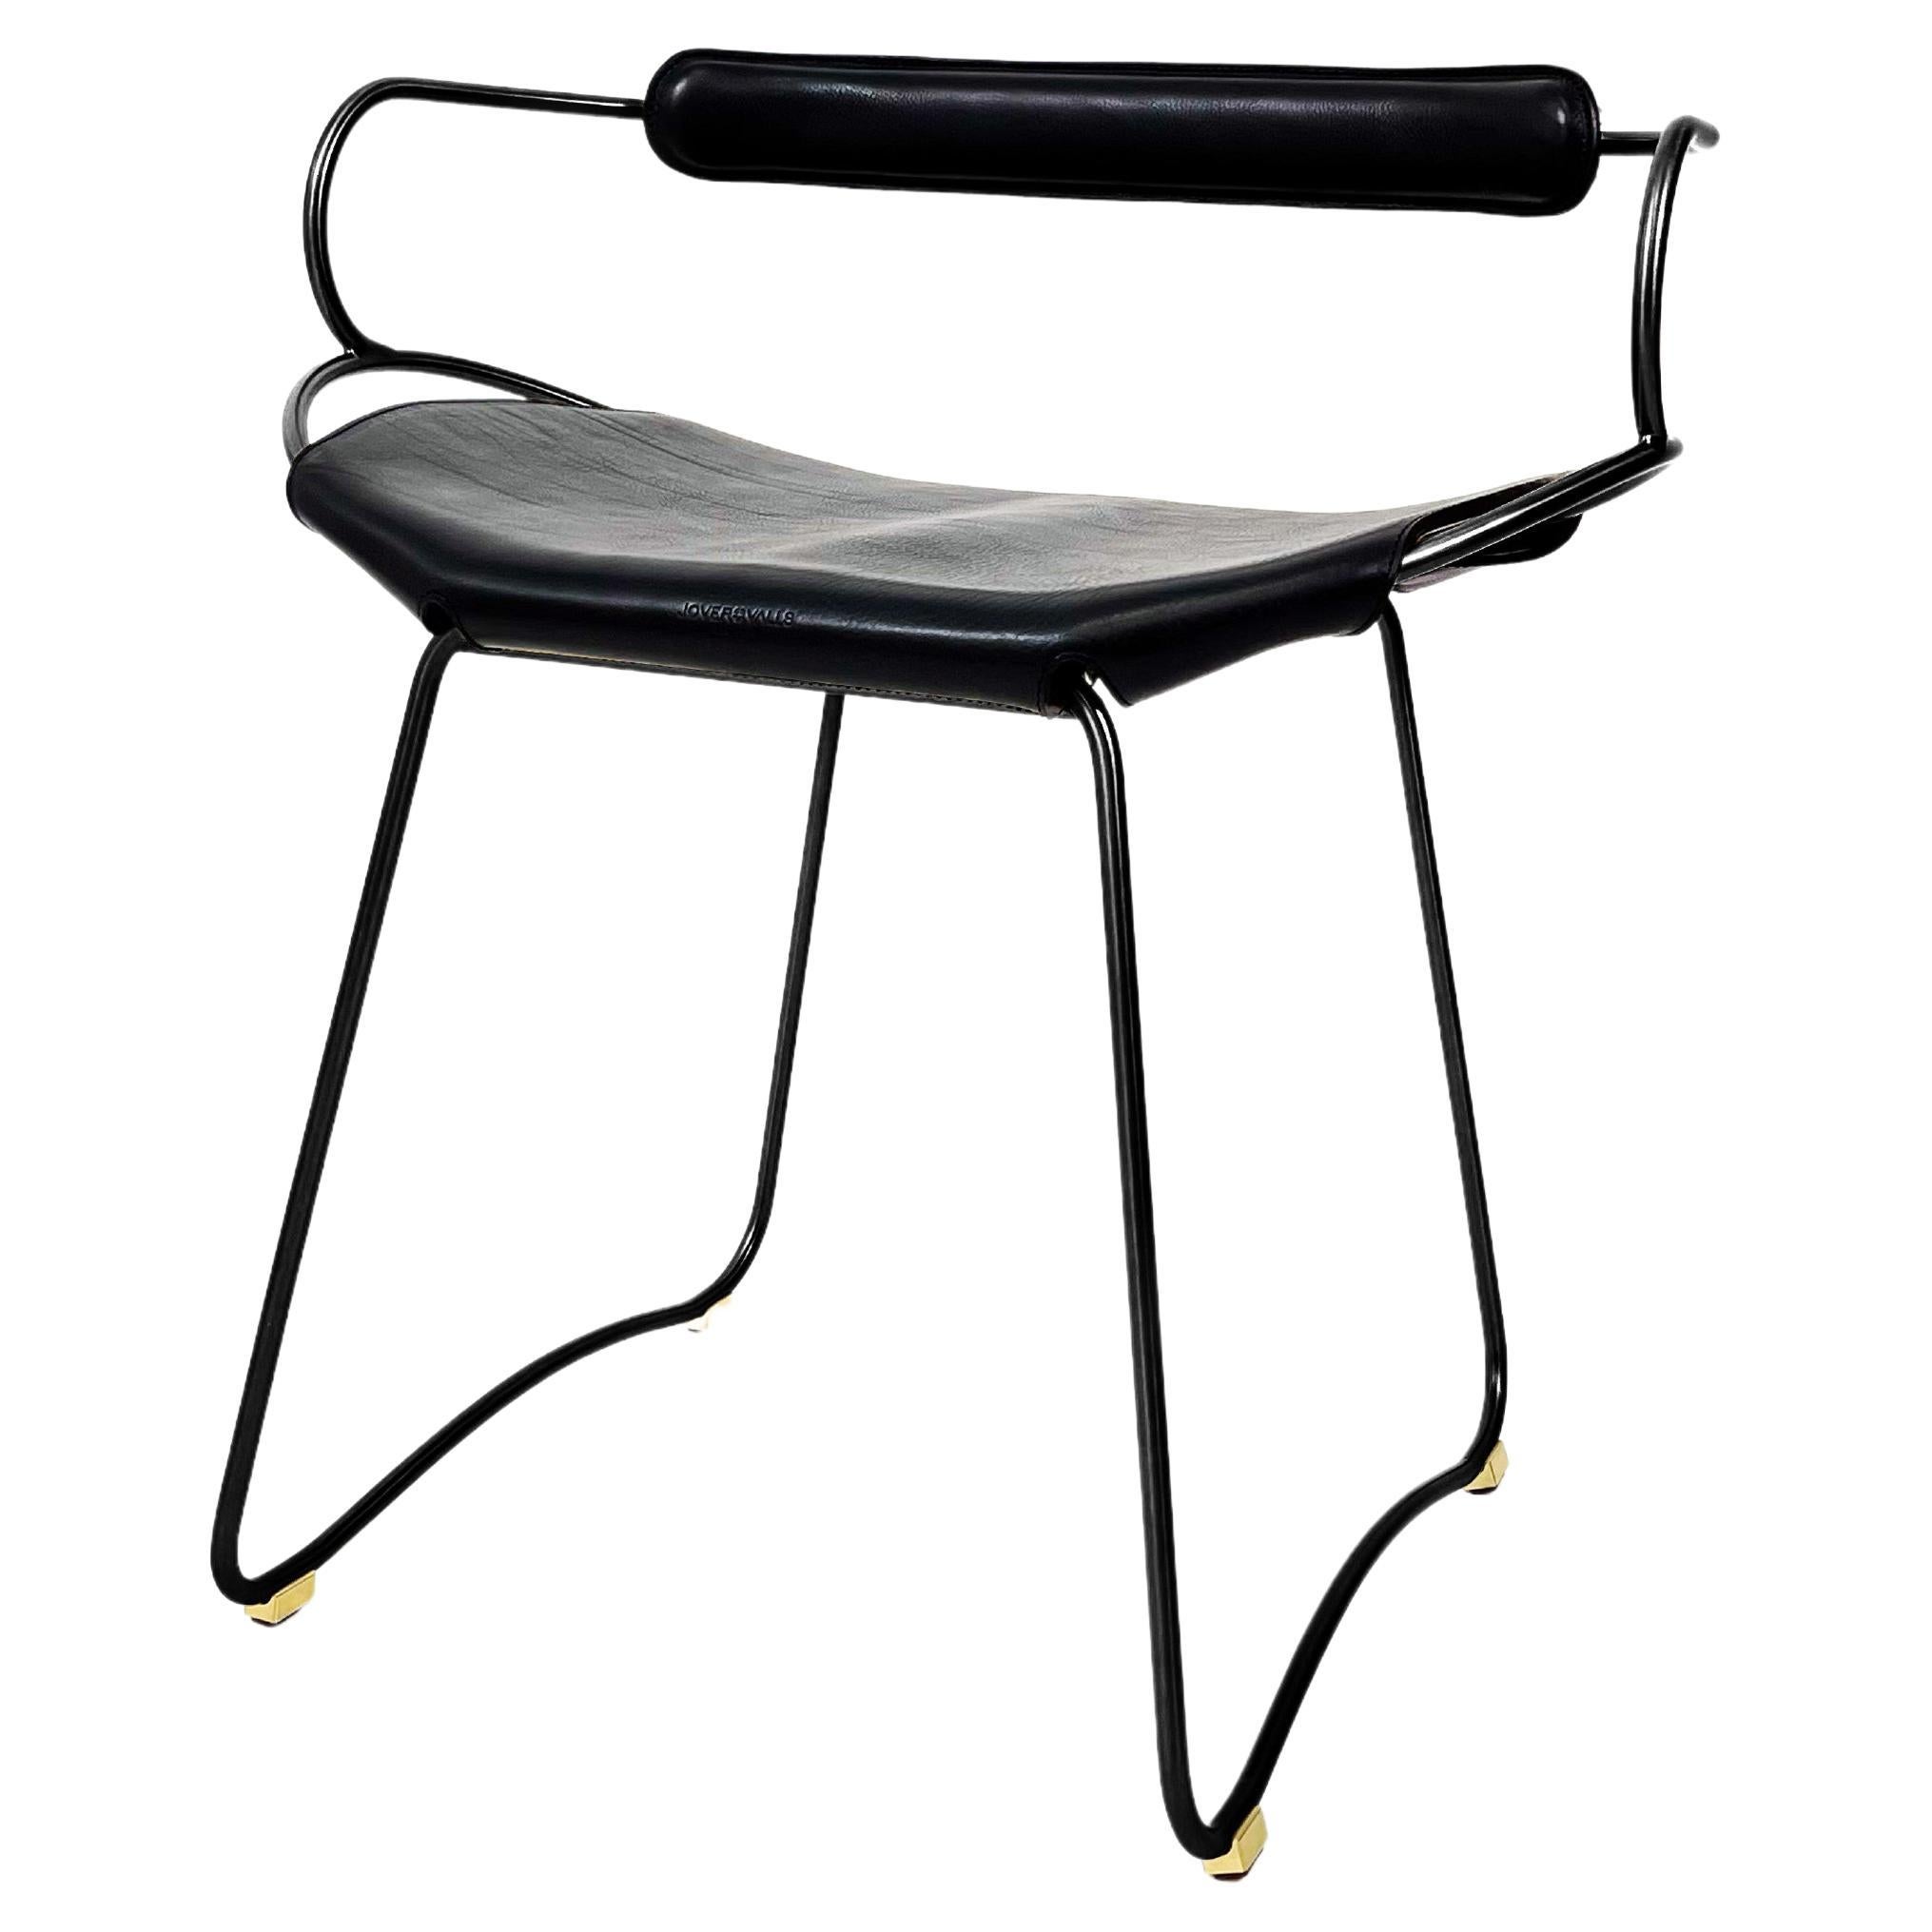 Table Height Sculptural Chair Stool w Backrest Black Smoke Metal & Black Leather For Sale